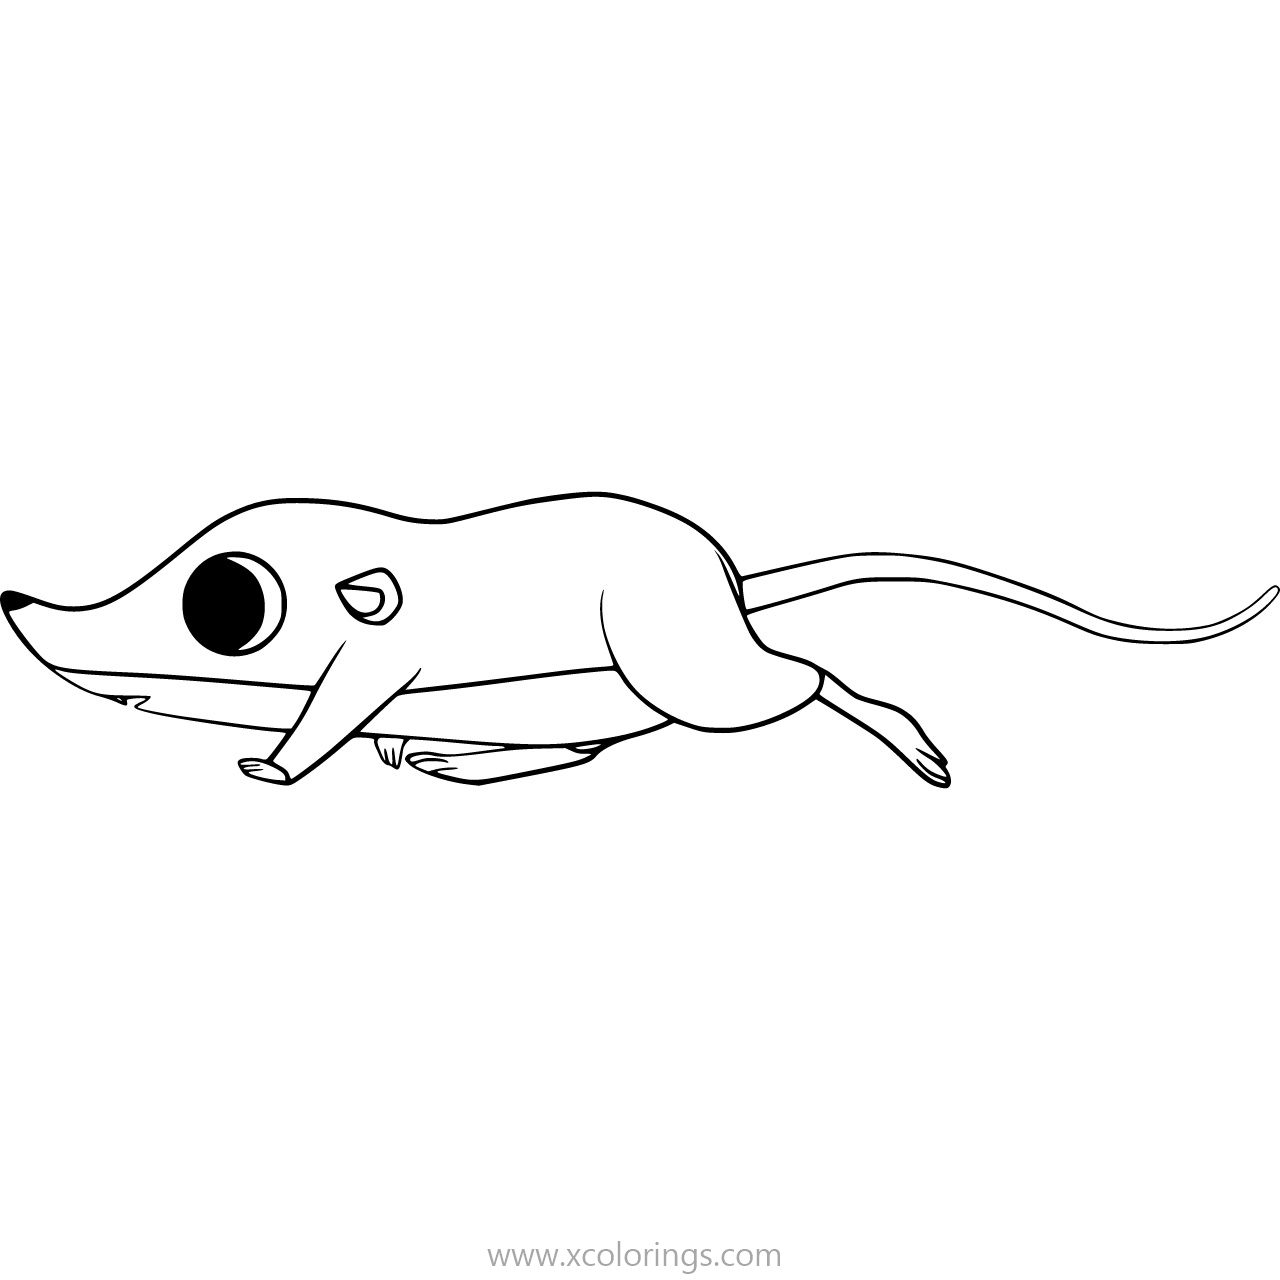 Free Puffin Rock Coloring Pages Mossy Shrew printable